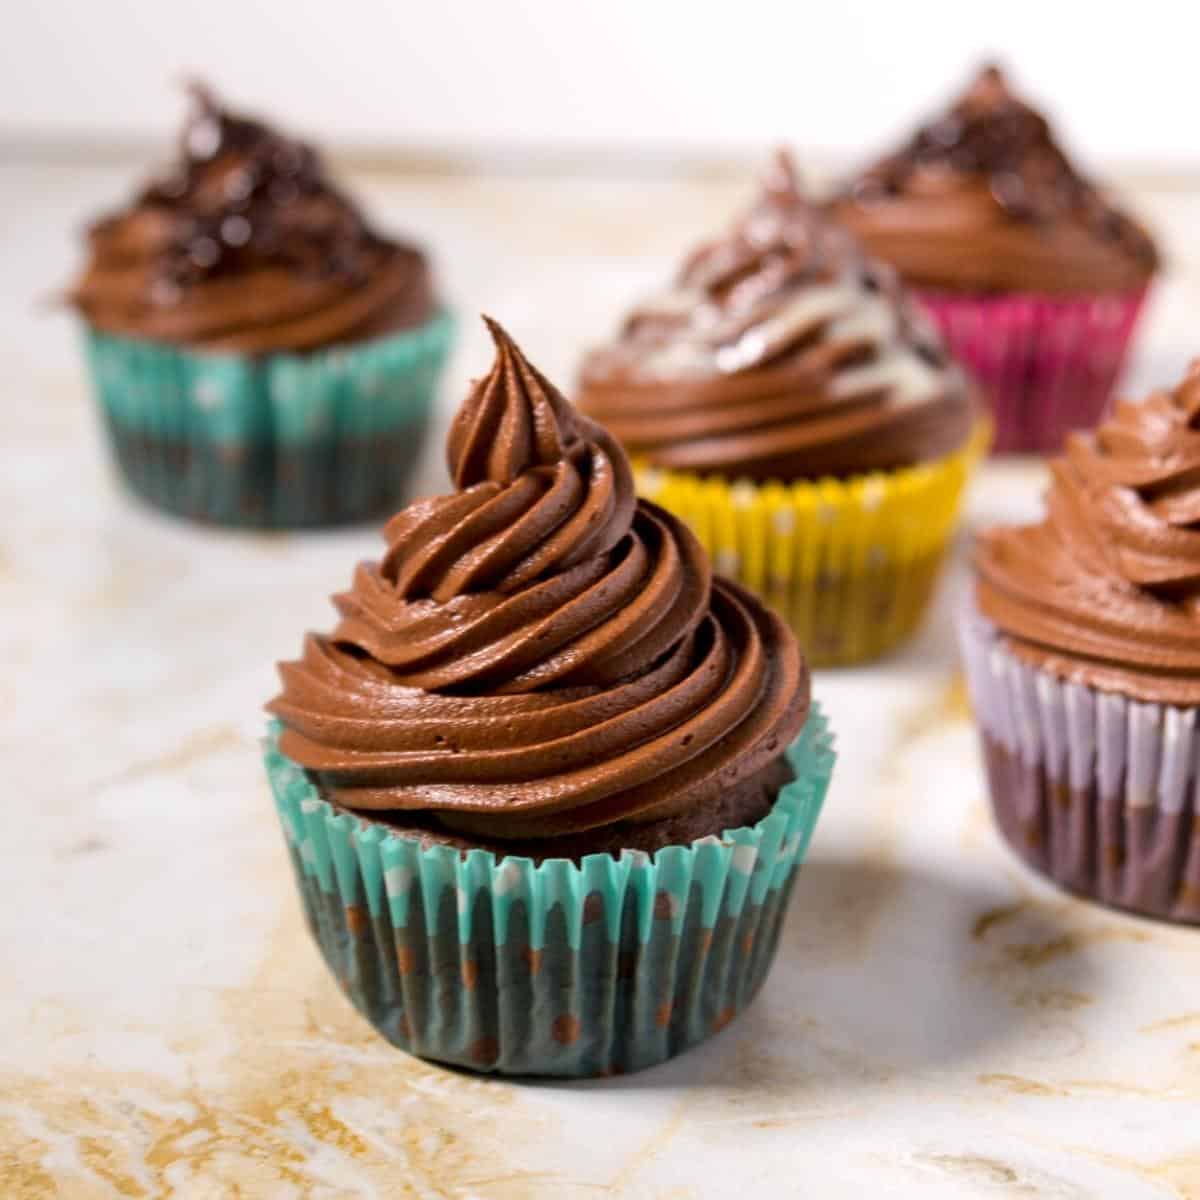 Five chocolate frosted cupcakes